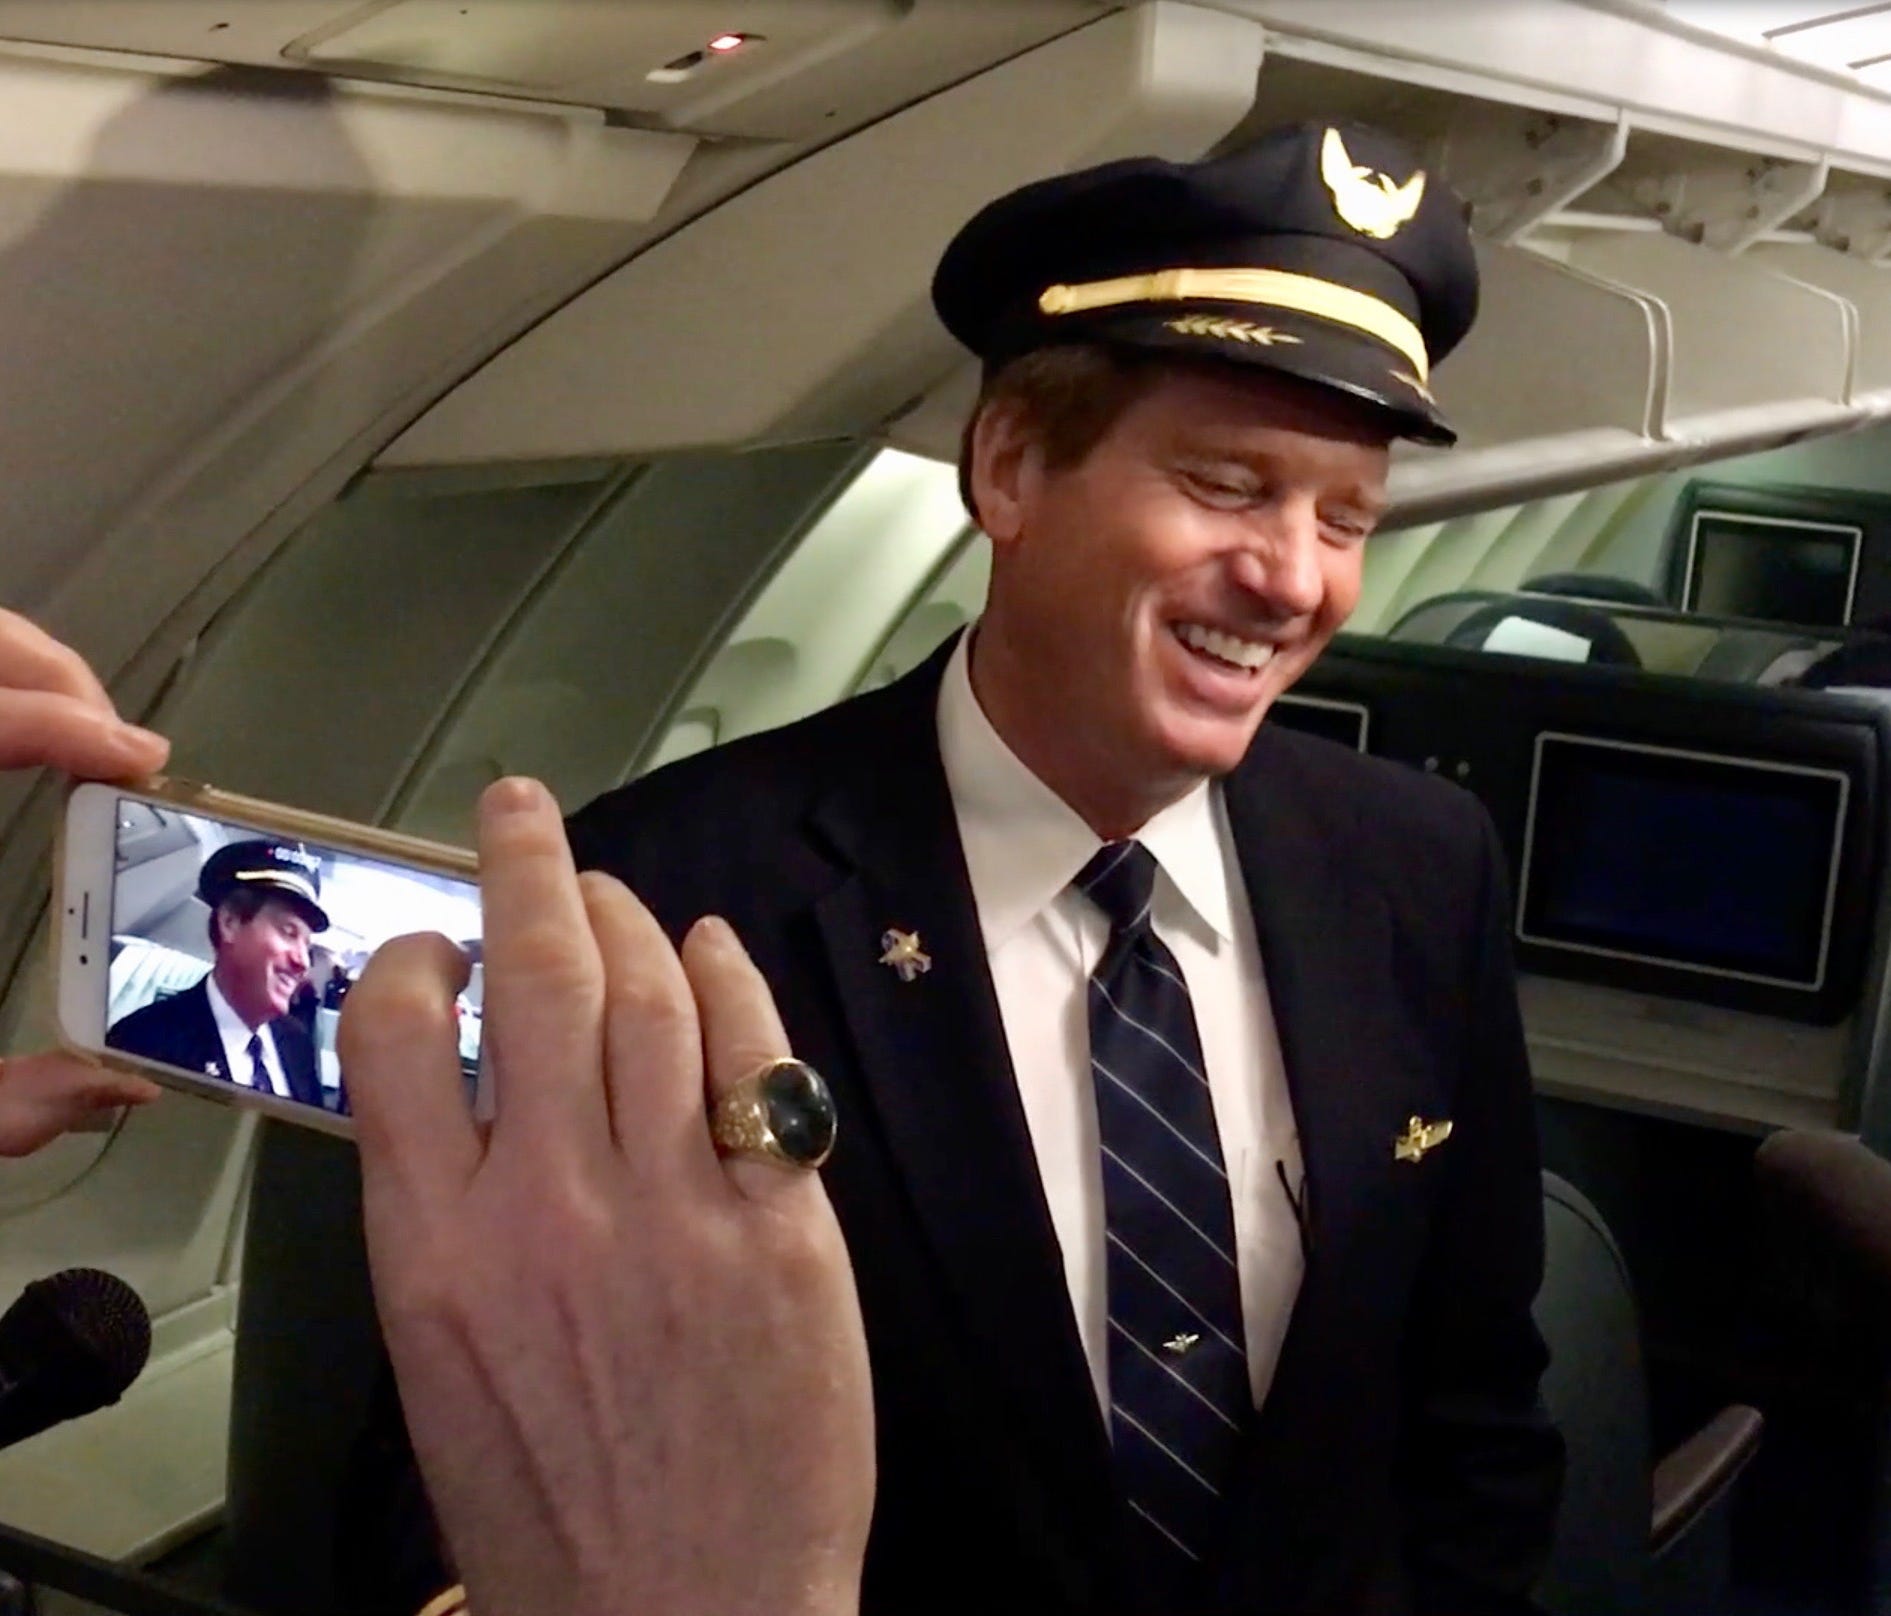 United Airlines Captain David Smith laughs during an interview aboard Flight 2704 Friday at Chicago O'Hare International Airport.